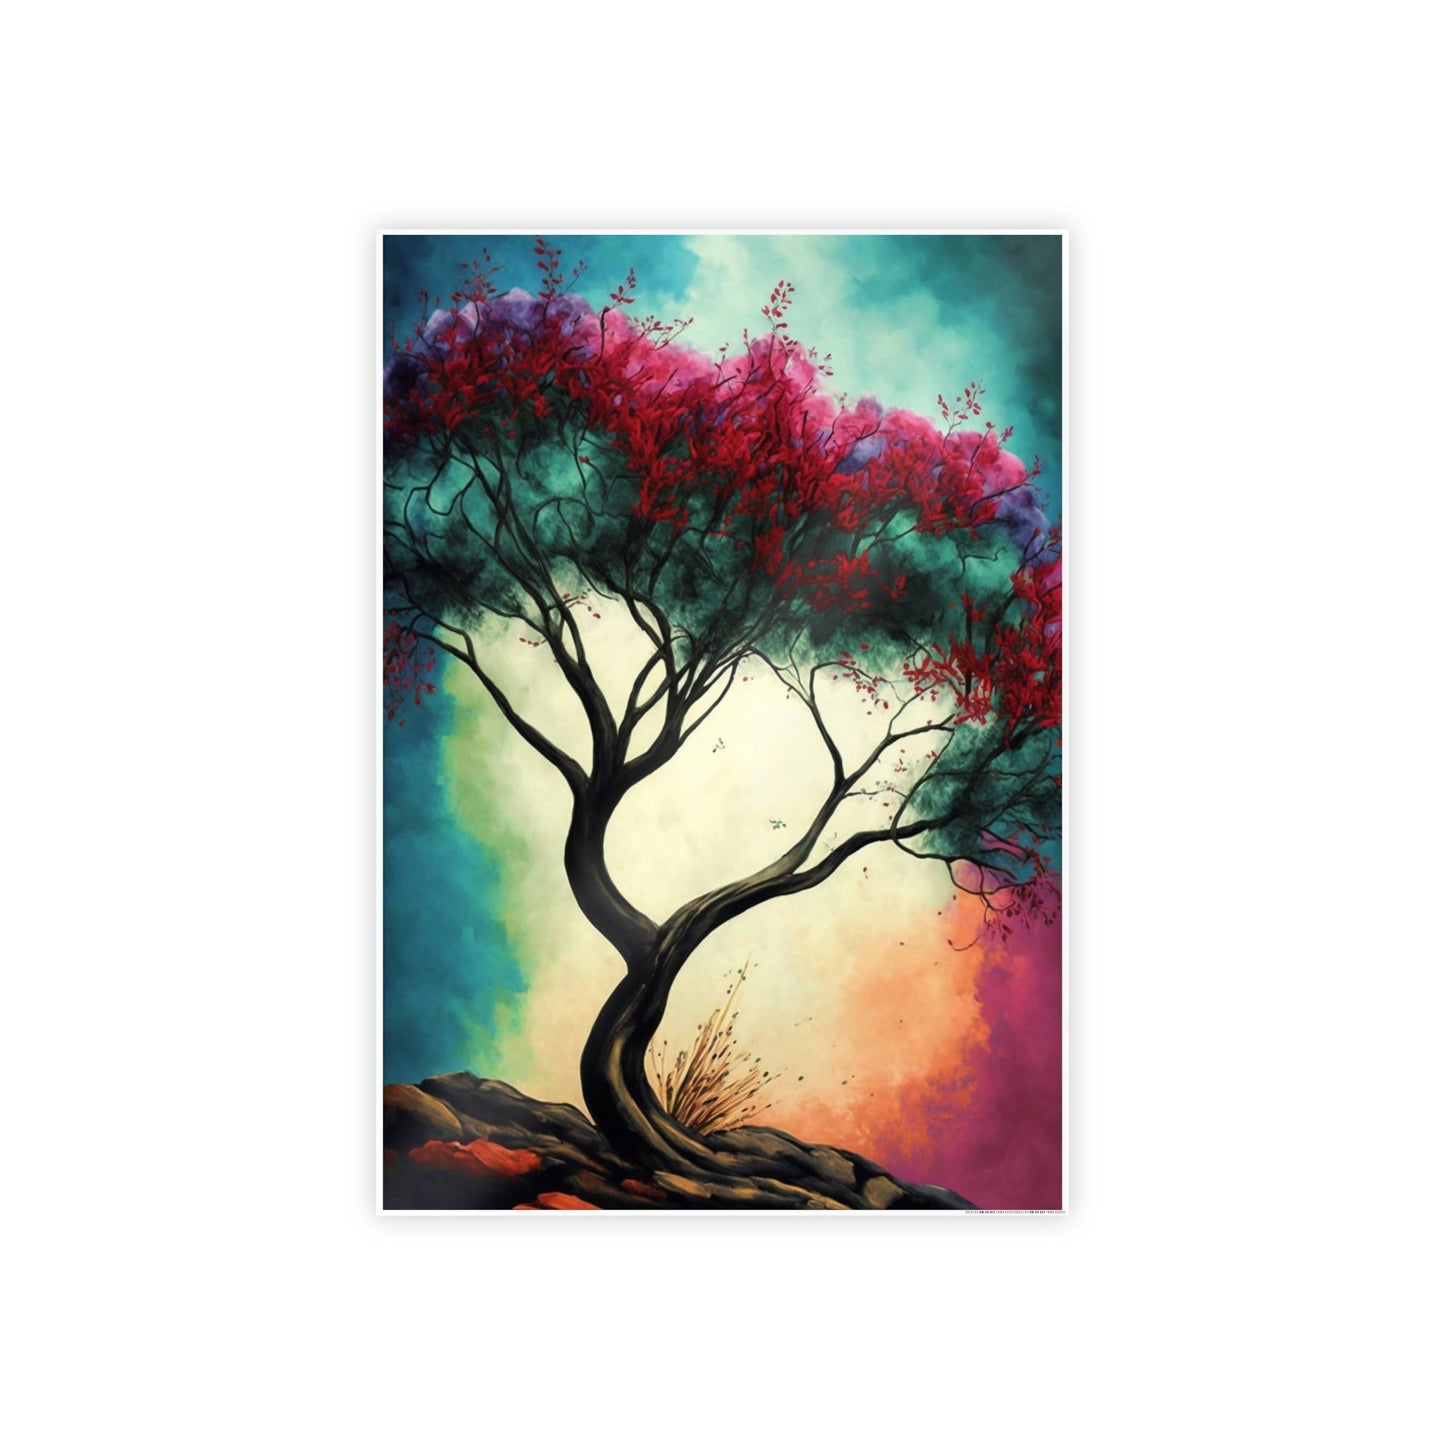 Majestic Horizons: A Natural Canvas & Poster Wall Art of Abstract Landscape